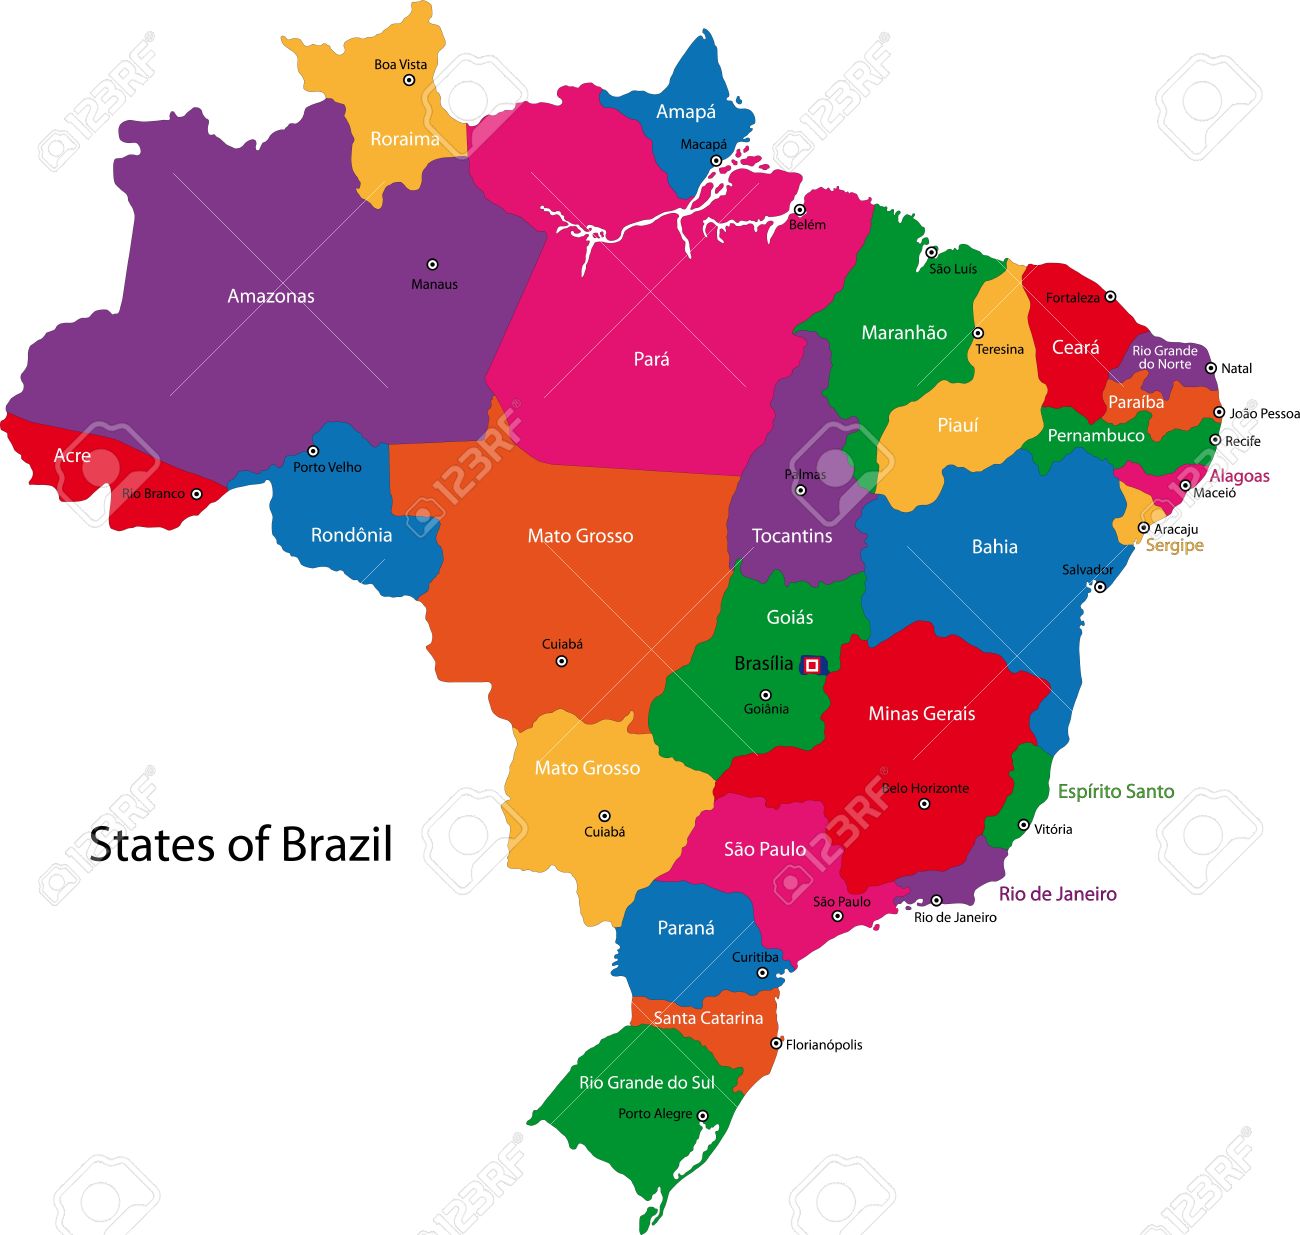 Colorful Brazil Map With States And Capital Cities Royalty Free.